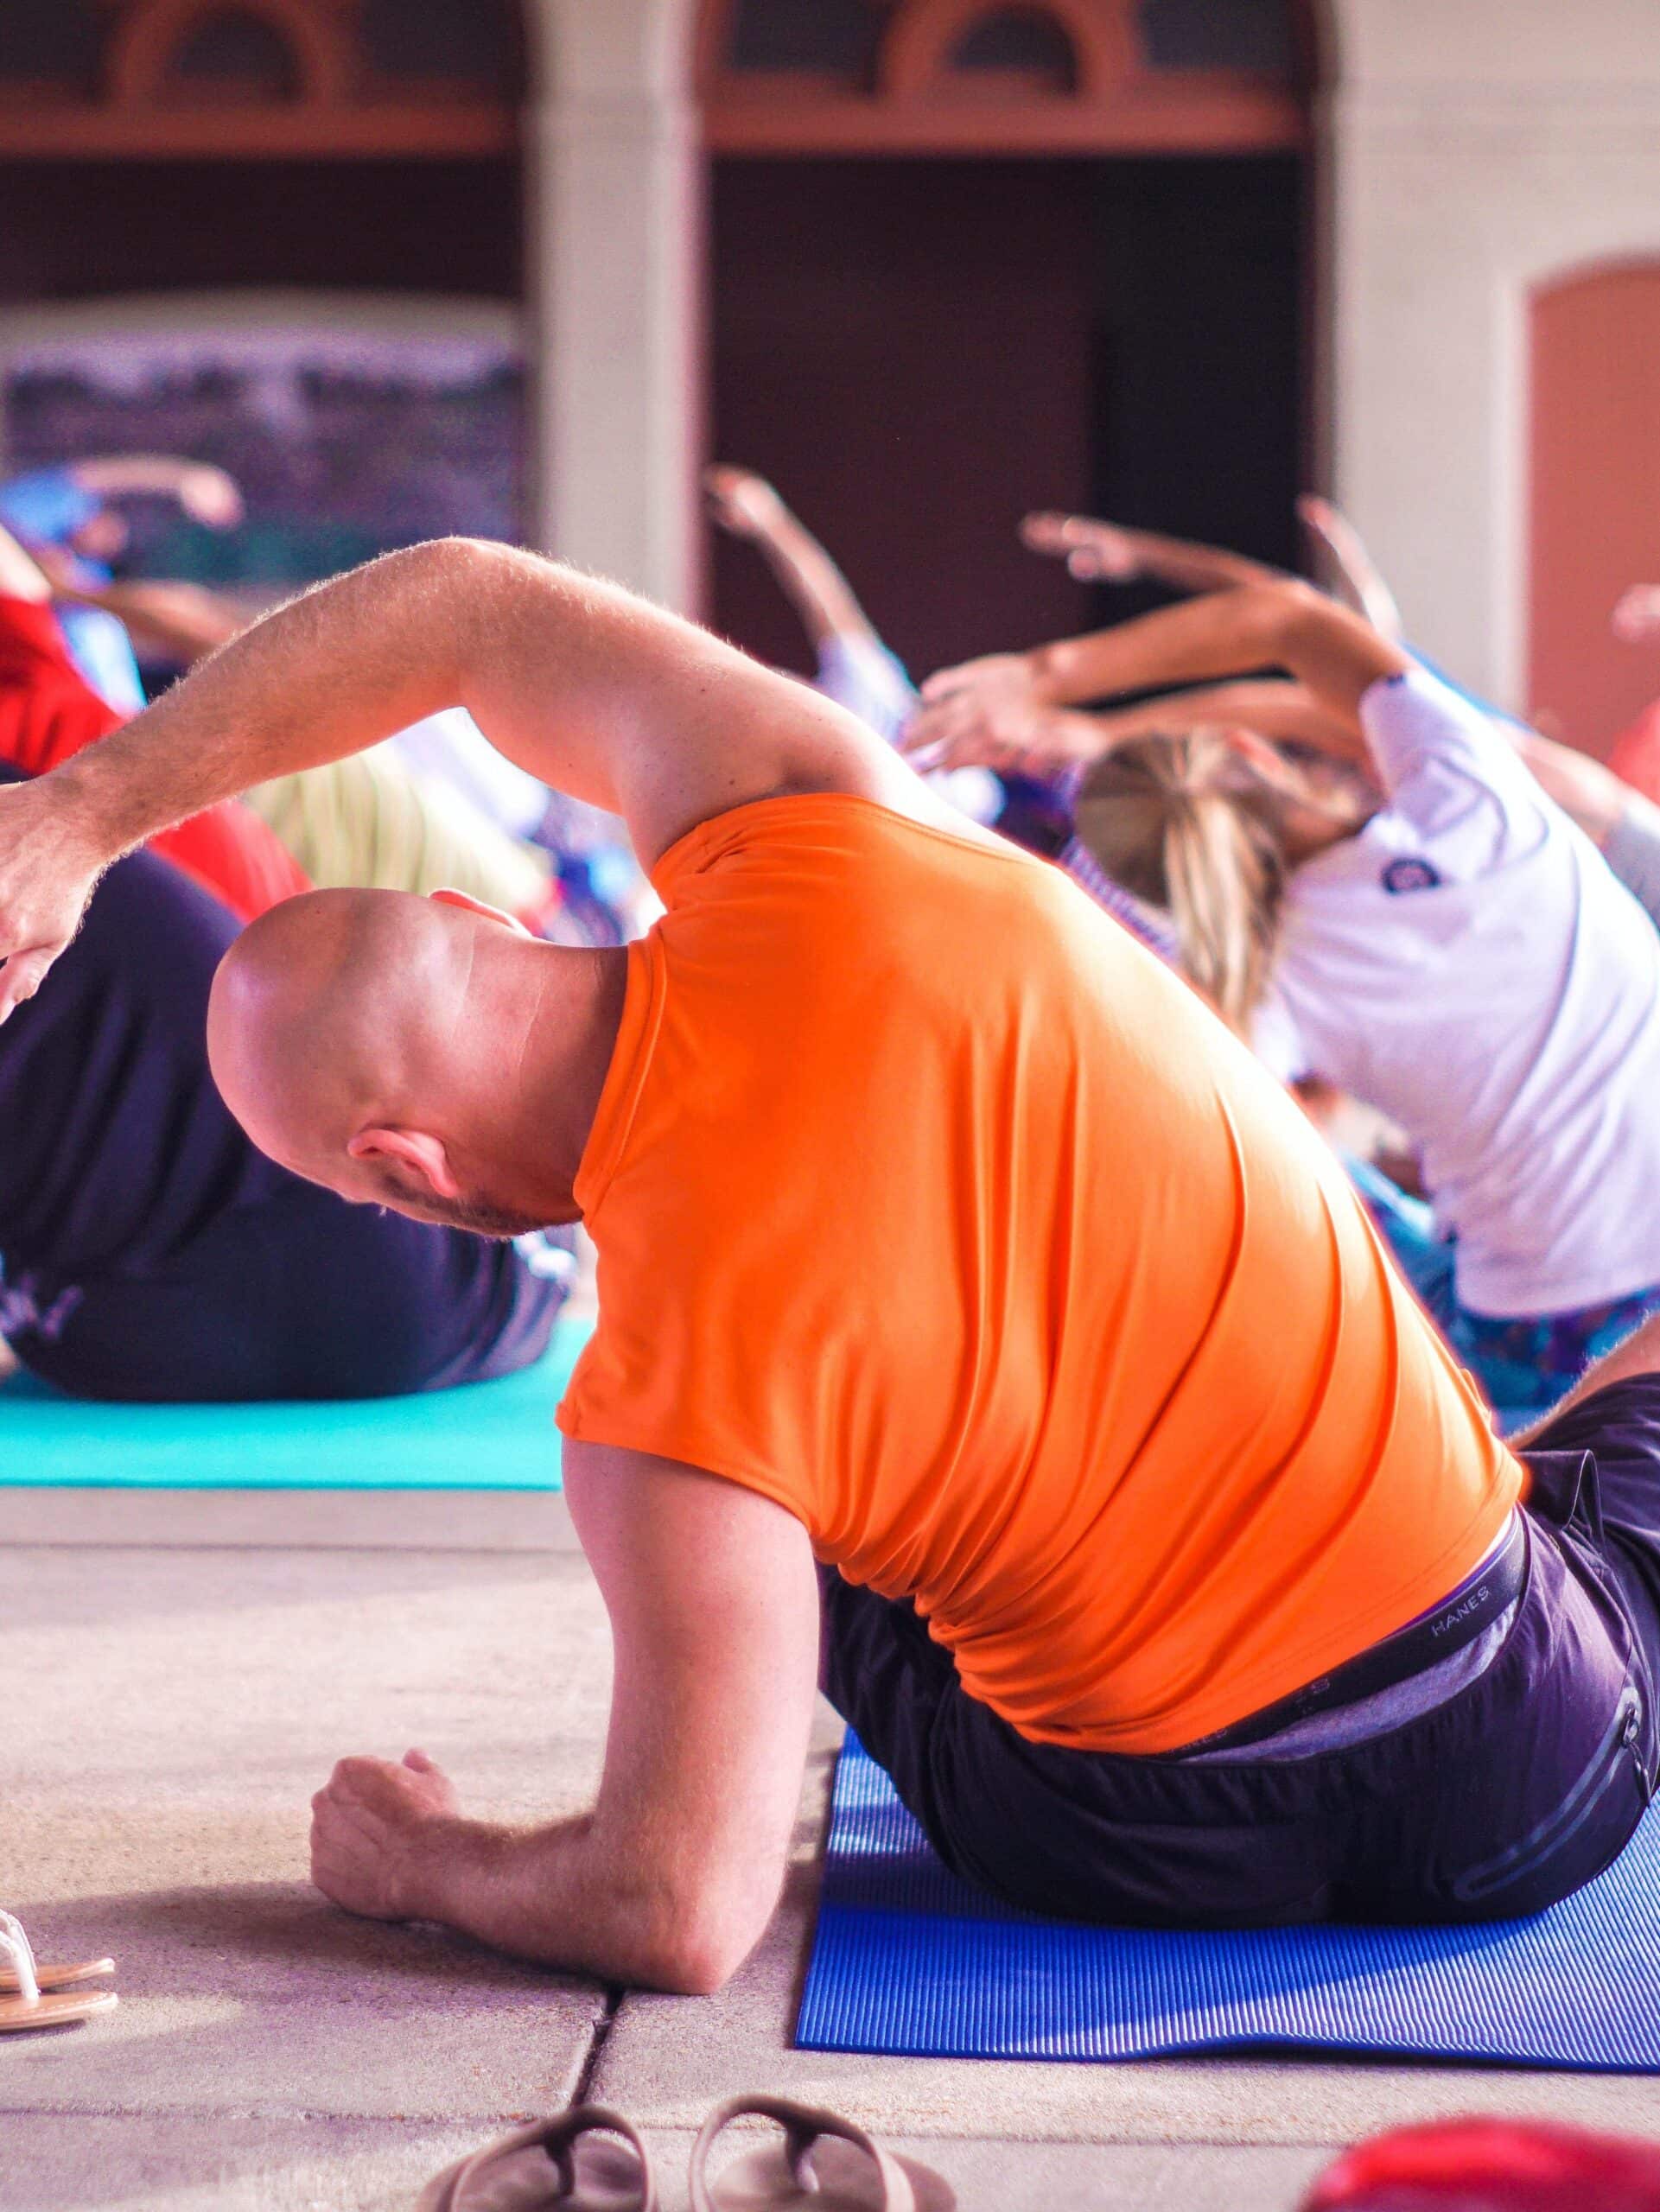 Bald man in orange tank top stretches to the left in a yoga class.